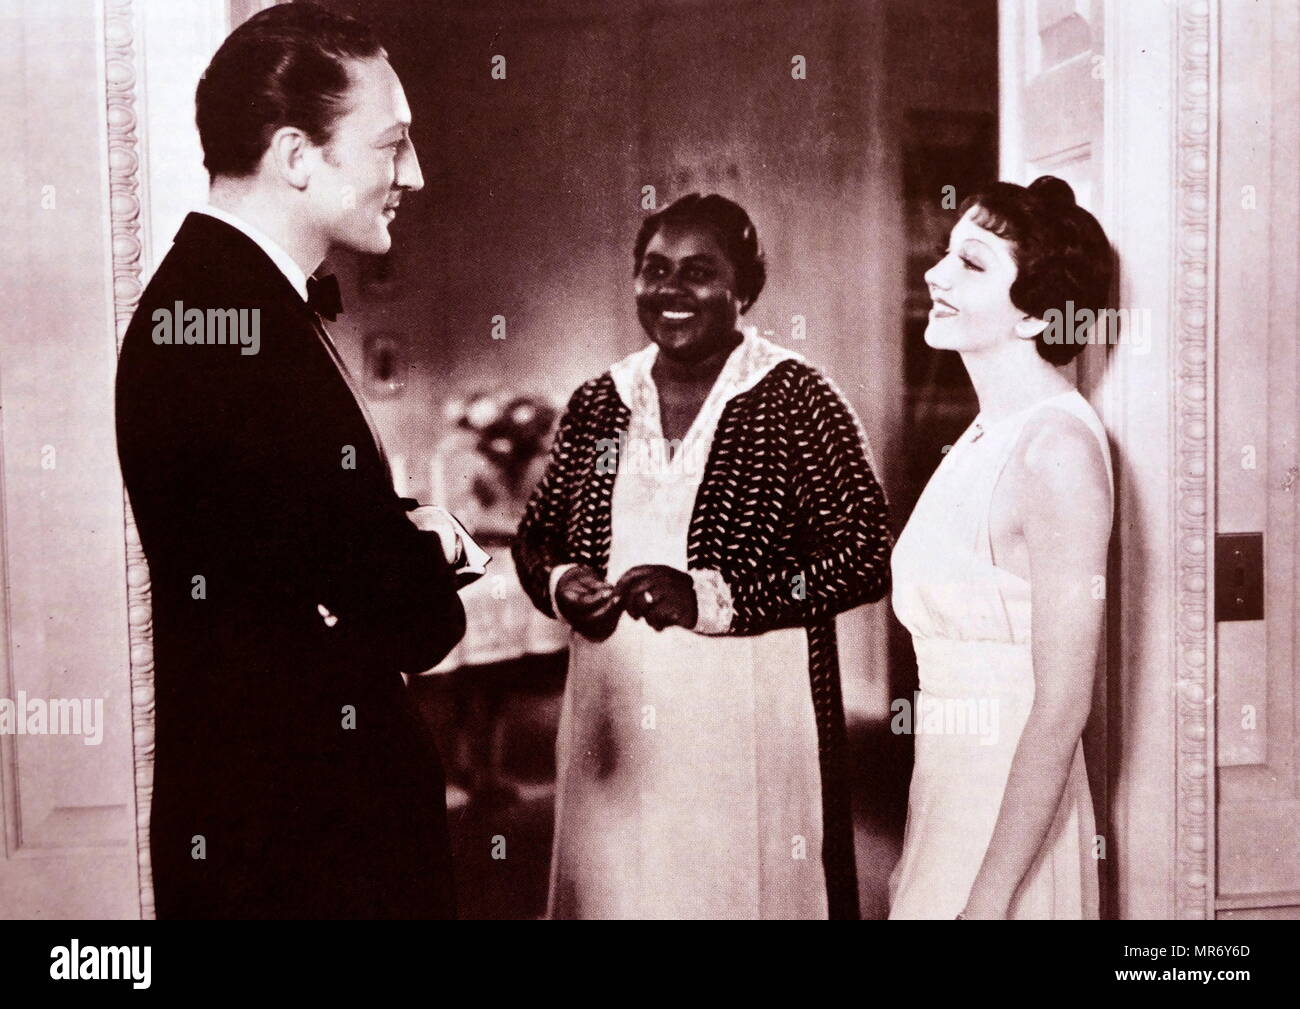 Imitation of Life is a 1934 American drama film directed by John M. Stahl. The screenplay by William Hurlbut, based on Fannie Hurst's 1933 novelo. The film stars Claudette Colbert, Warren William. In this scened Hattie McDaniel  appears with Warren William and Claudette Colbert. Mc Daniel was a pioneer African American actress Stock Photo